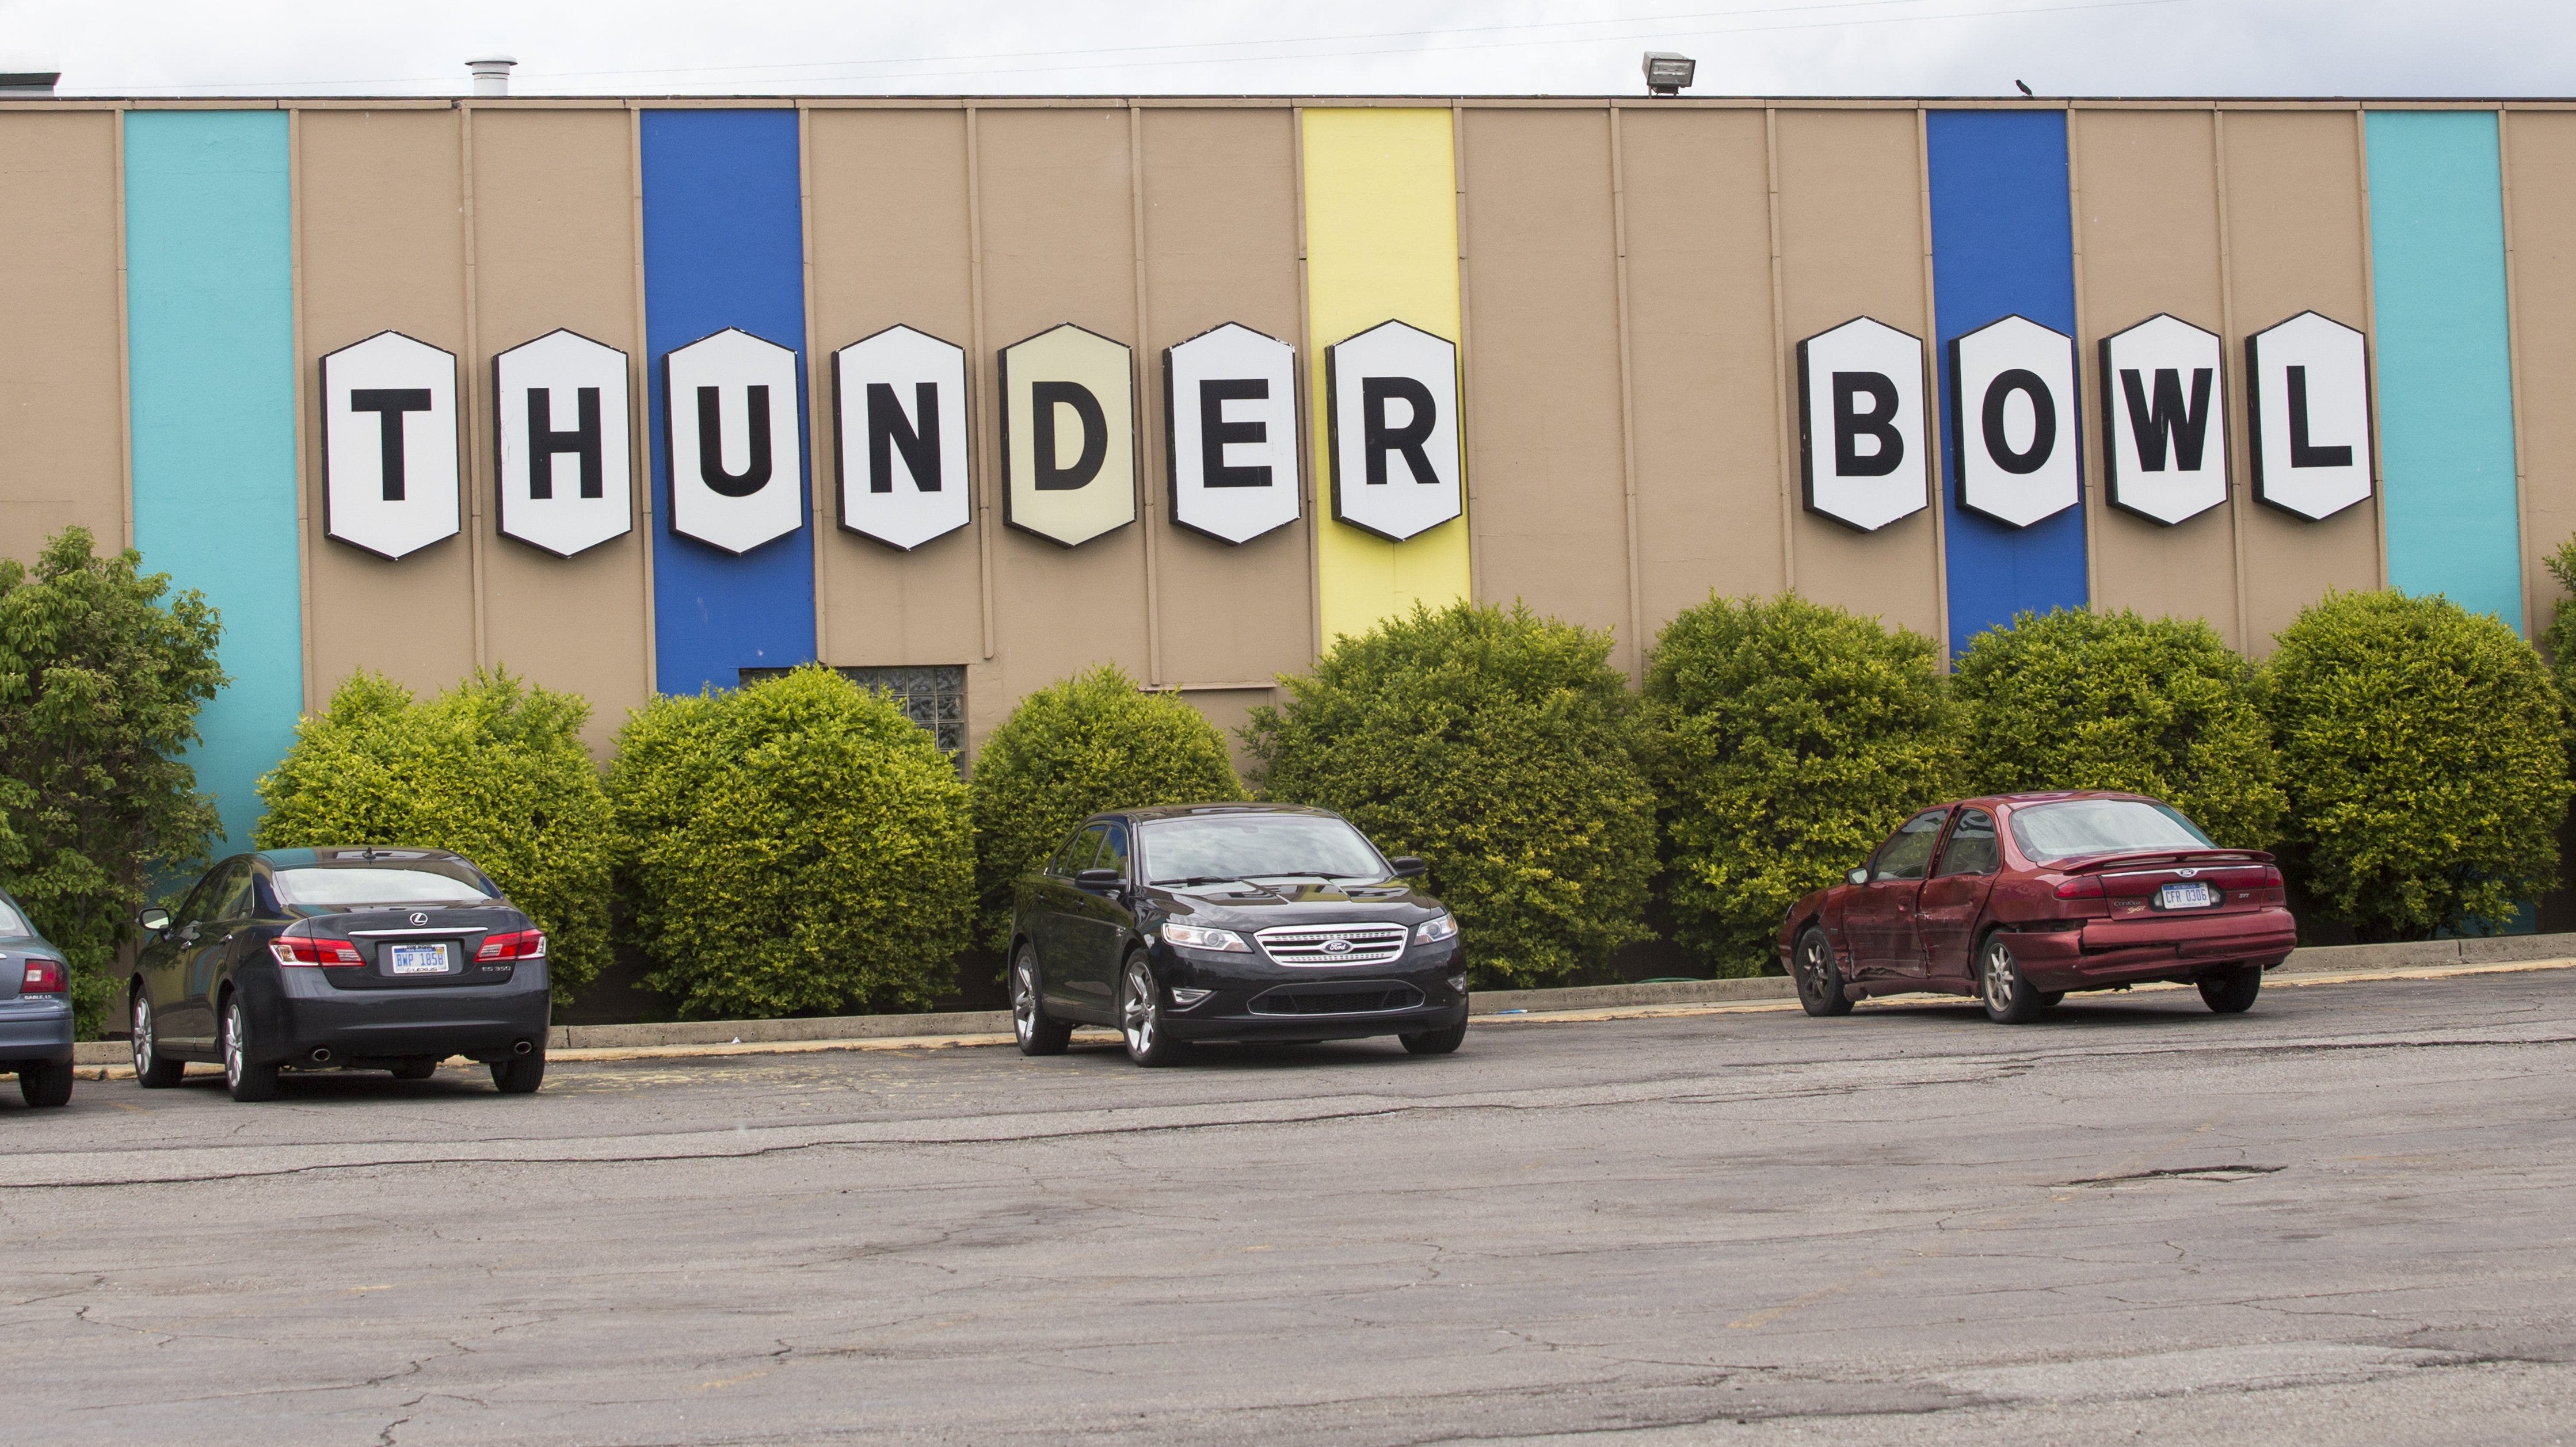 Thunderbowl Lanes in Allen Park to be bought by Bowlero